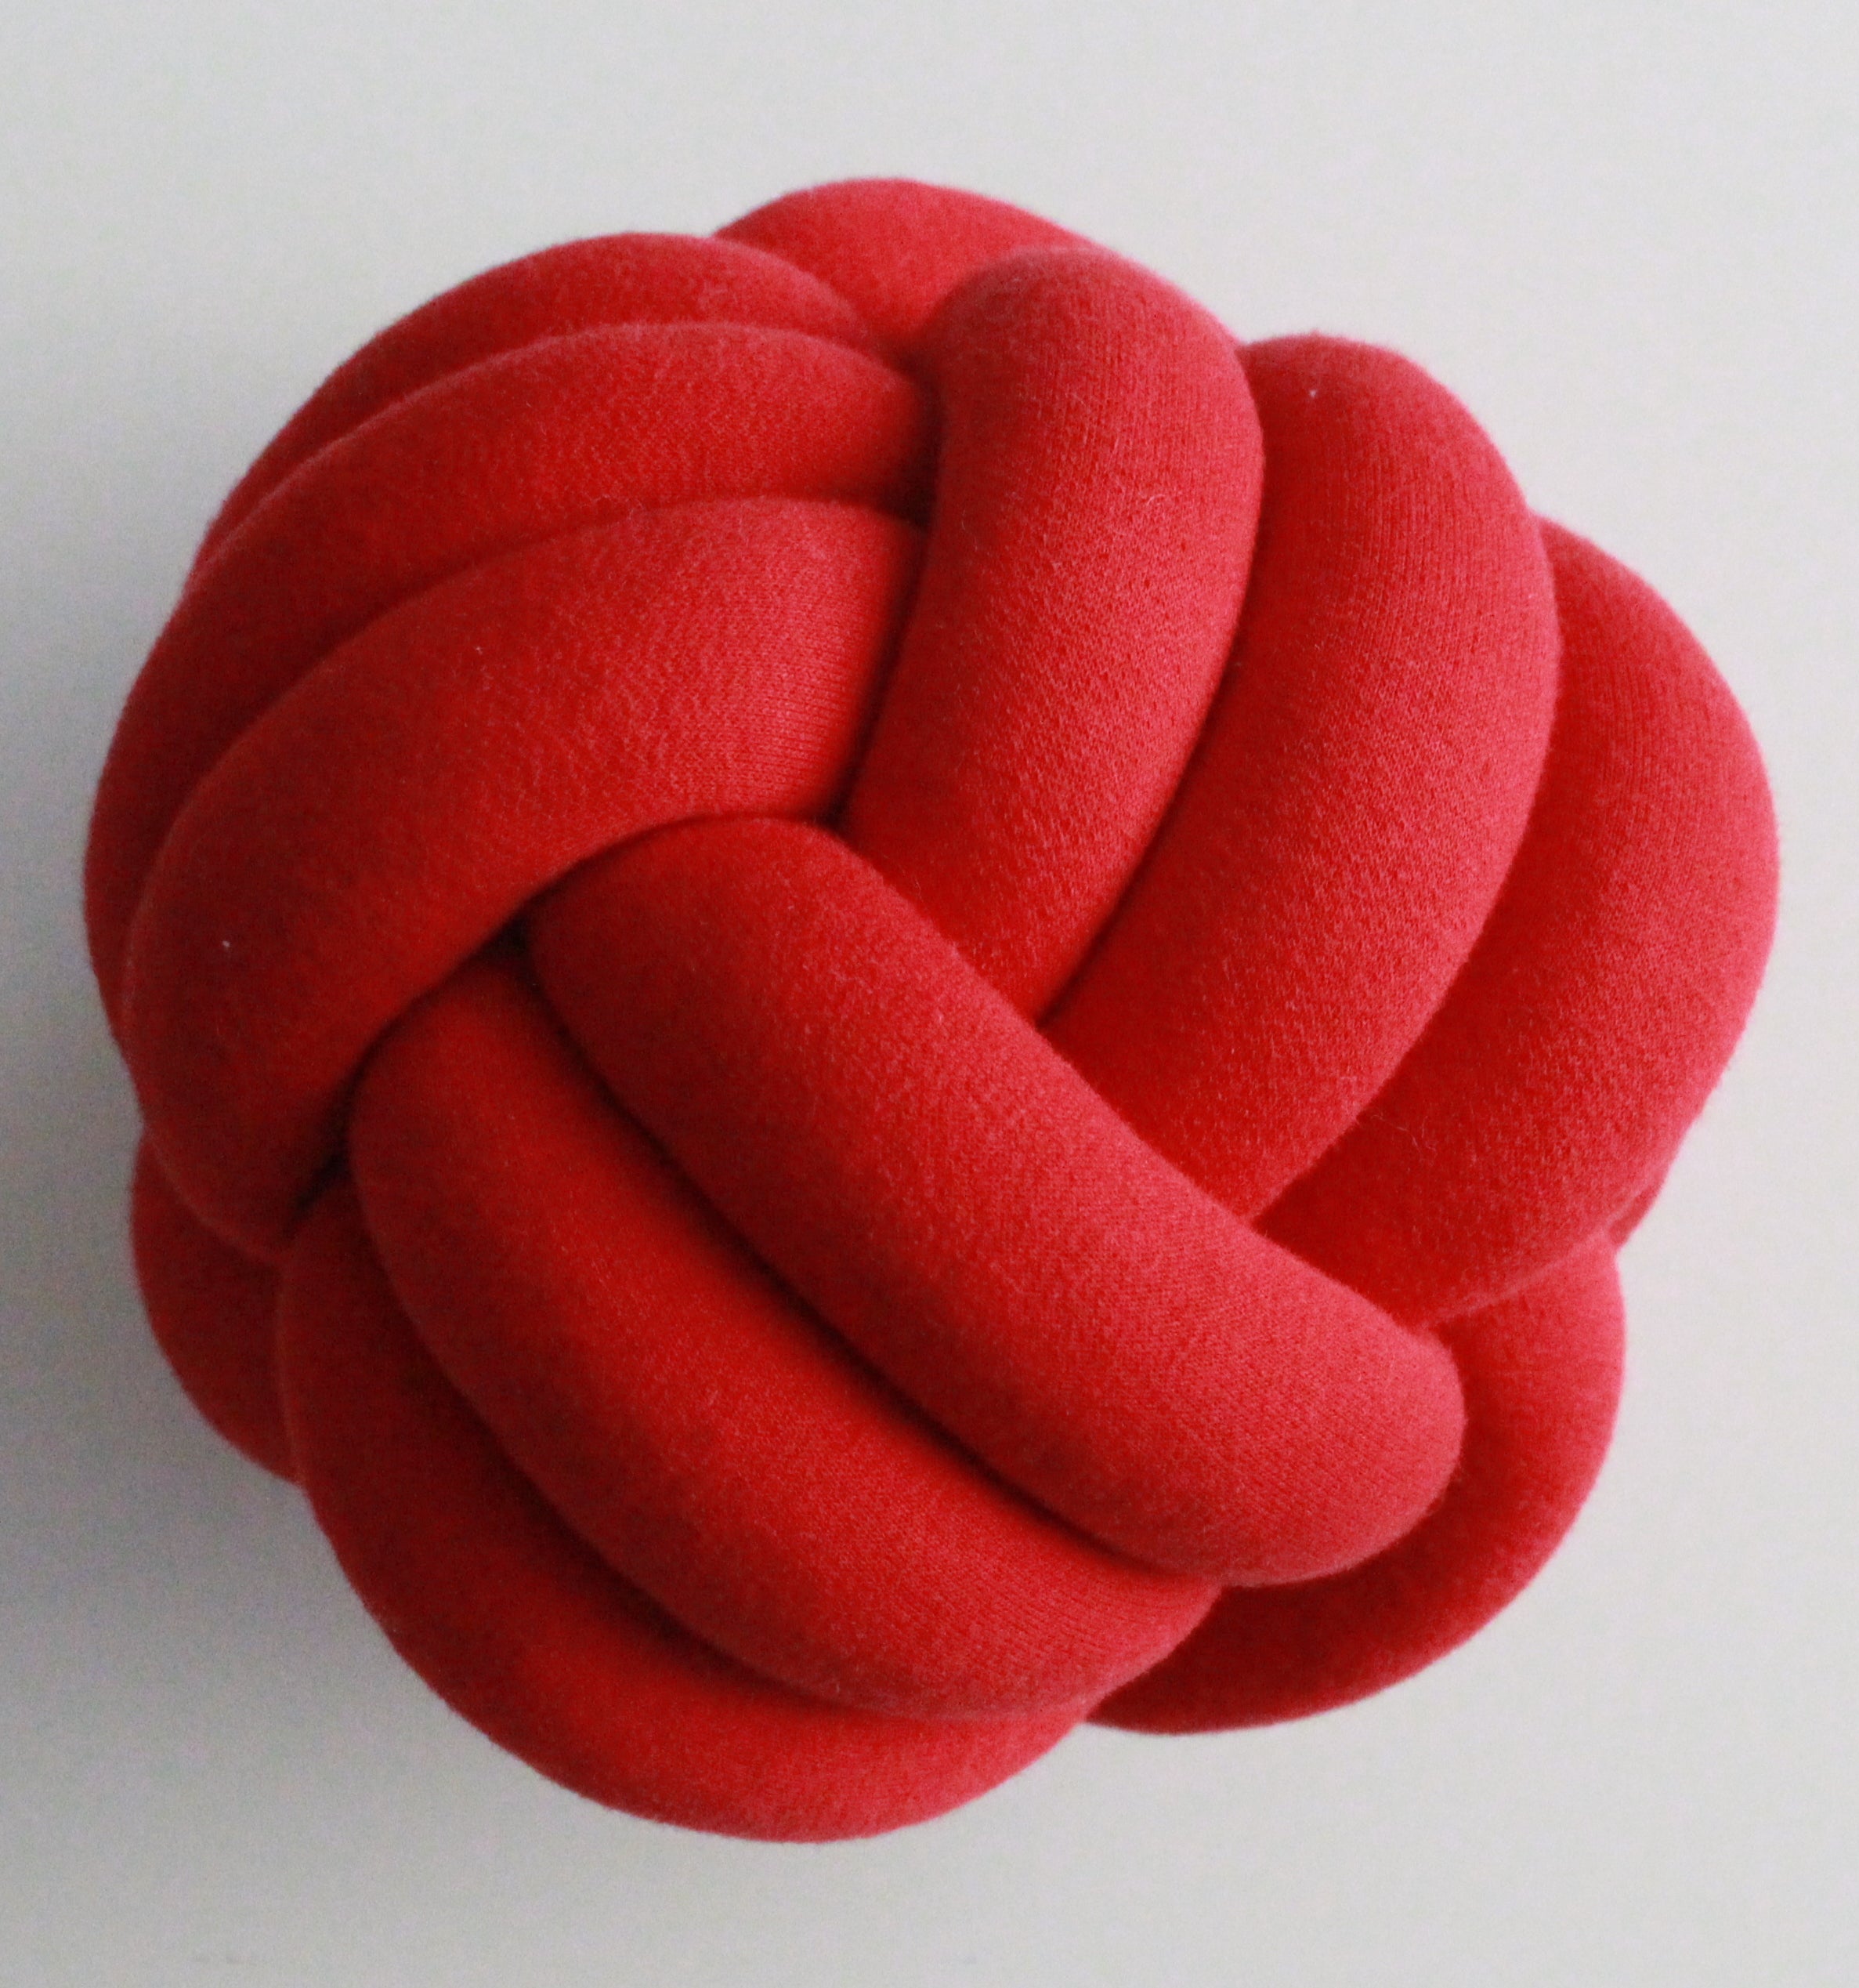 Grande Sphere Knot Pillow - See more Knot Pillows & Cushions at JujuAndJake.com